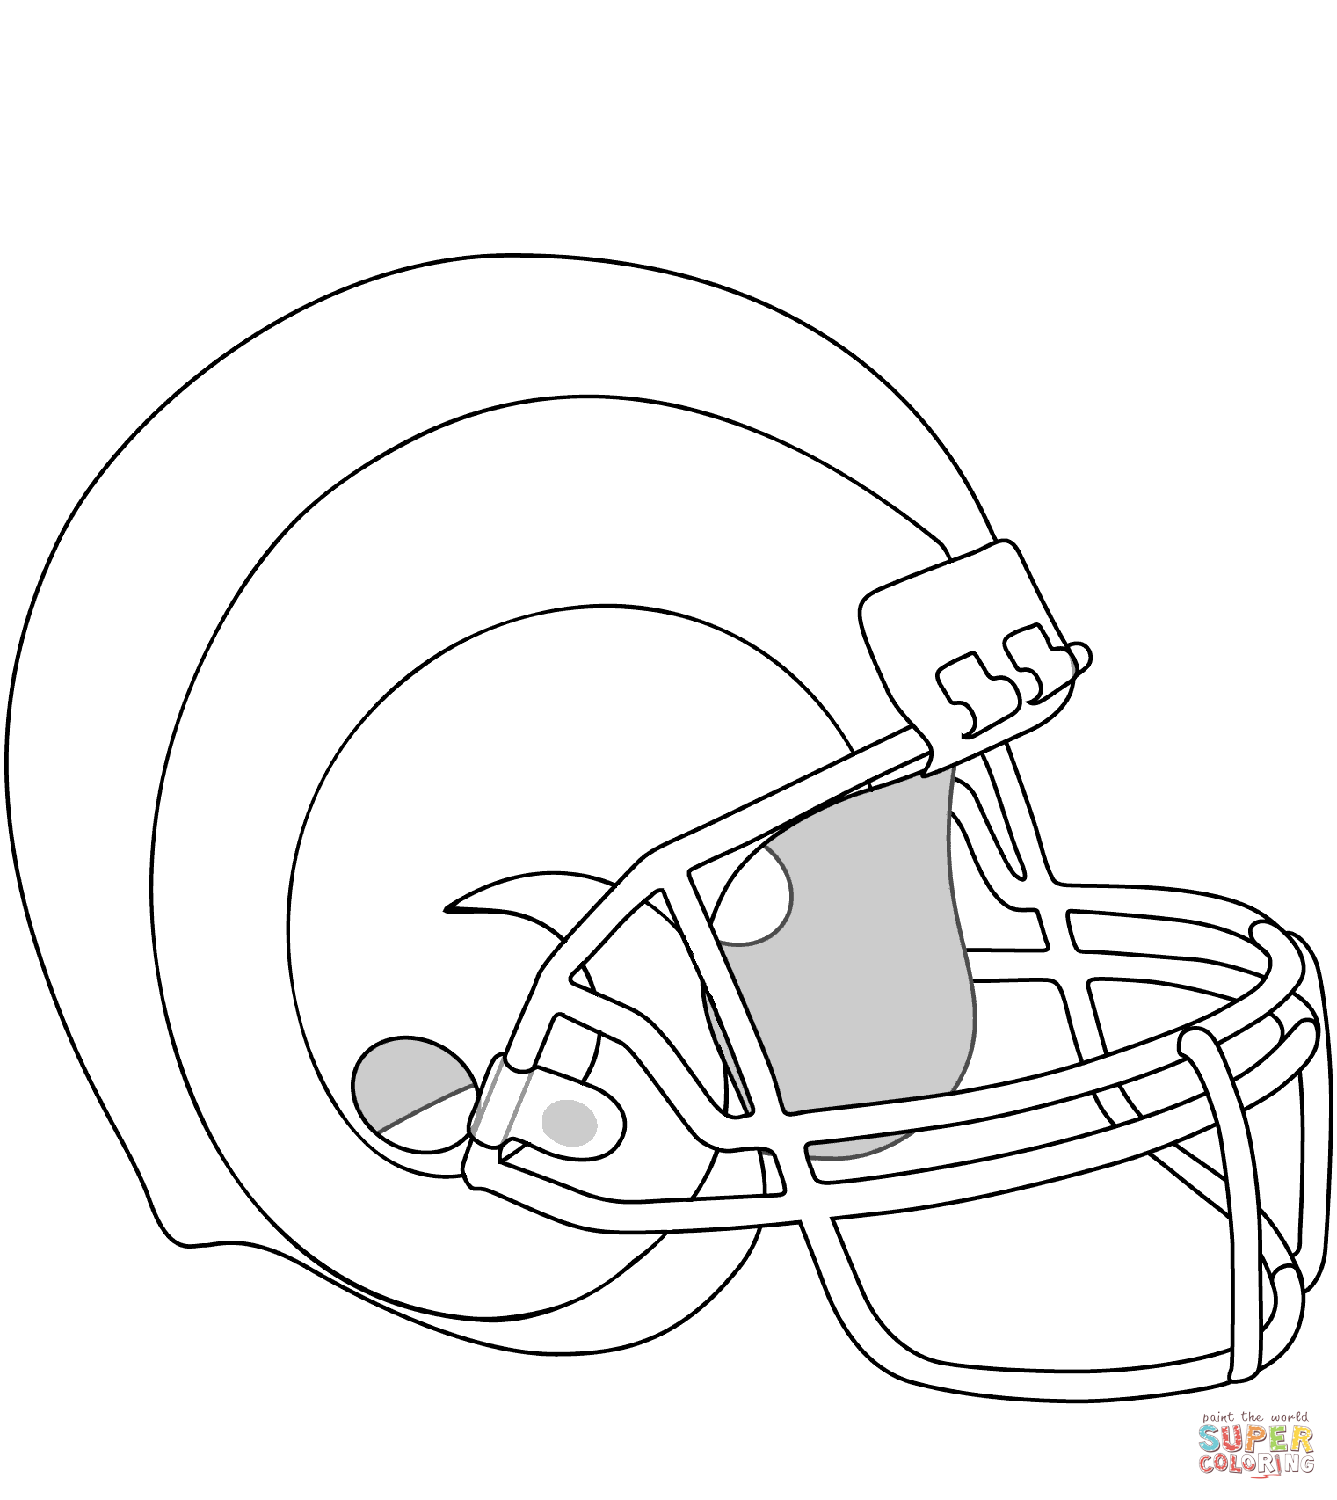 Los angeles rams helmet coloring page free printable coloring pages